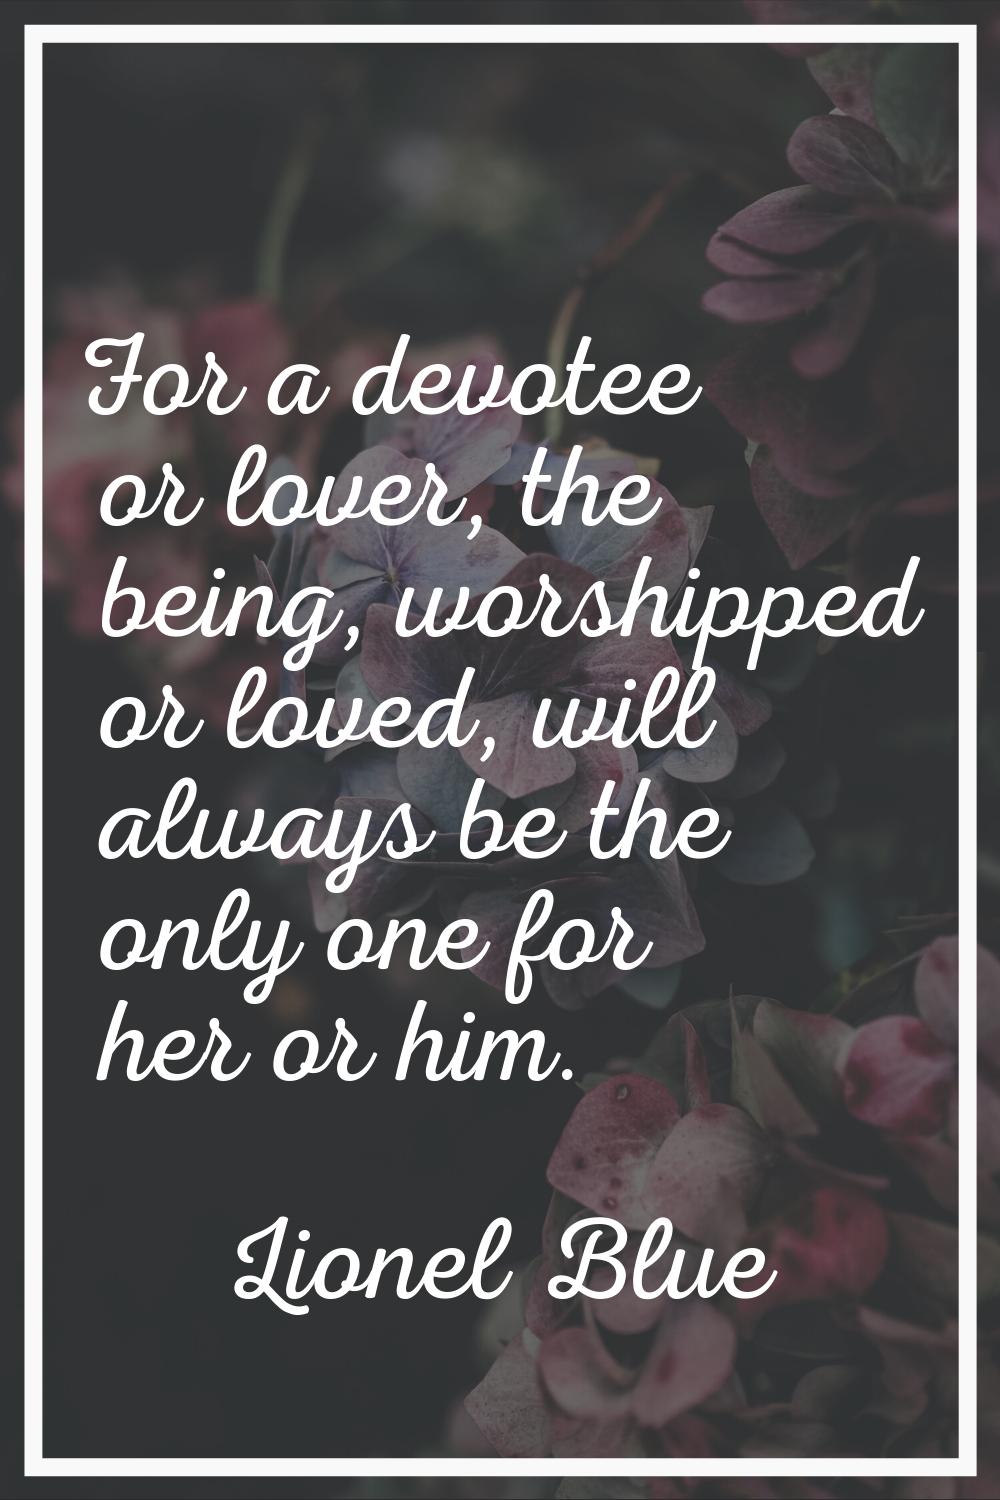 For a devotee or lover, the being, worshipped or loved, will always be the only one for her or him.